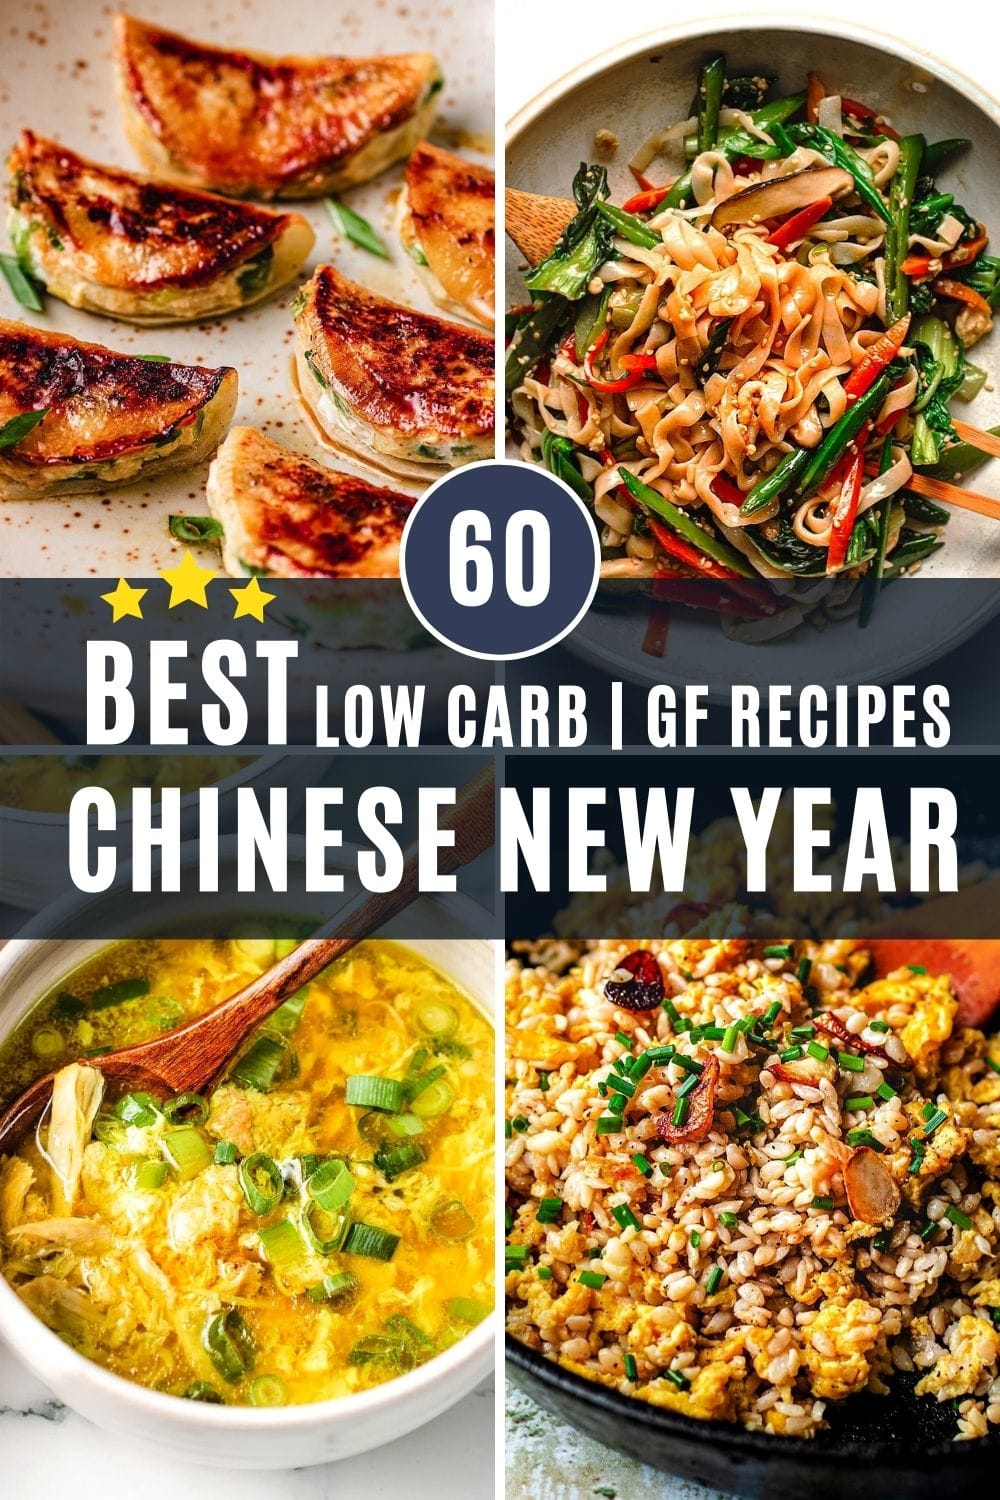 10 Lunar New Year Dessert Recipes, Recipes, Dinners and Easy Meal Ideas